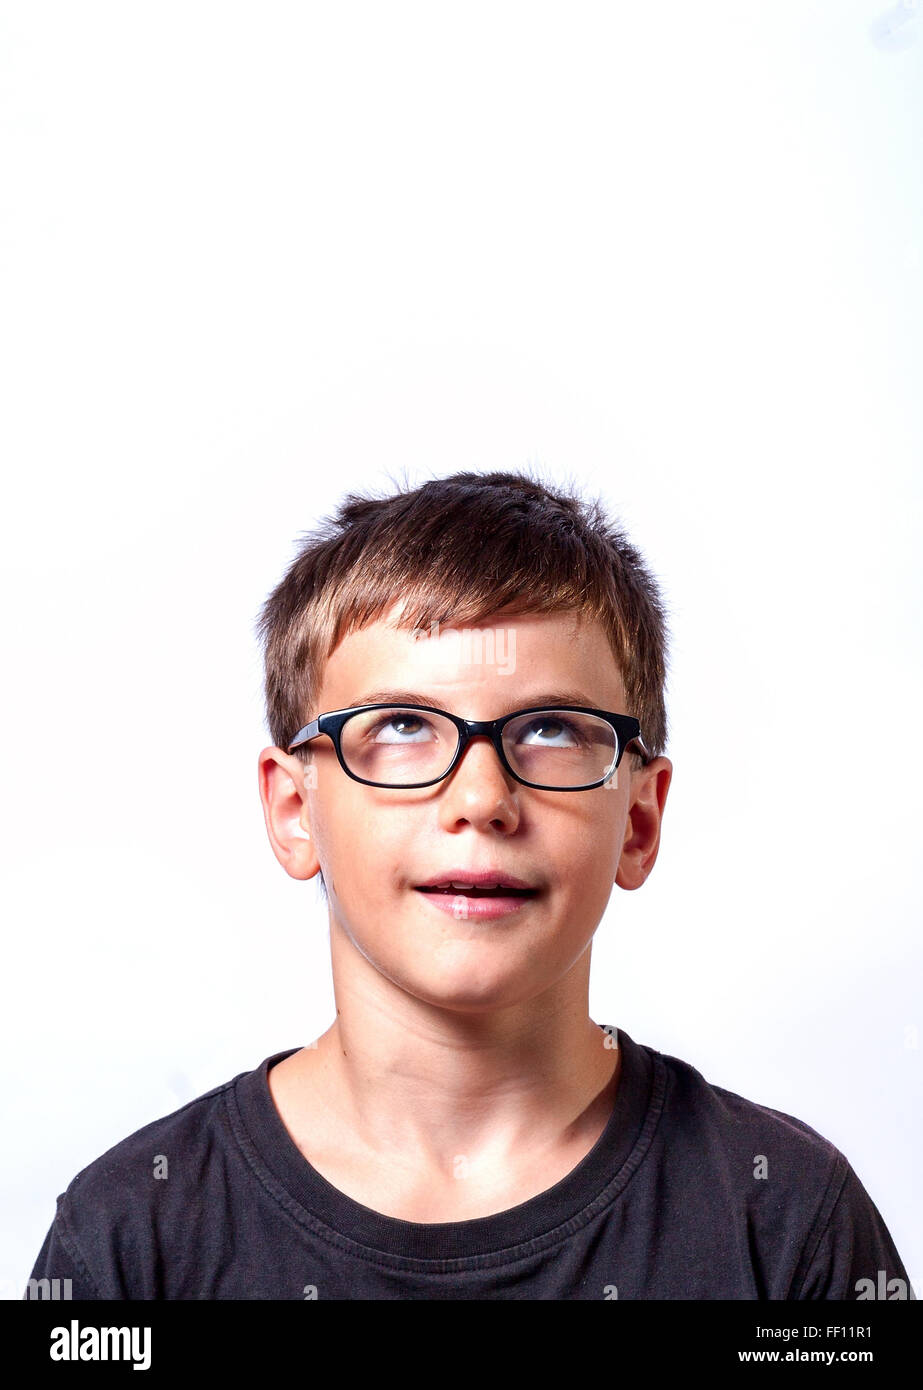 Thinking child portrait of a little boy age 11 in glasses thinking deeply about something looking up Stock Photo